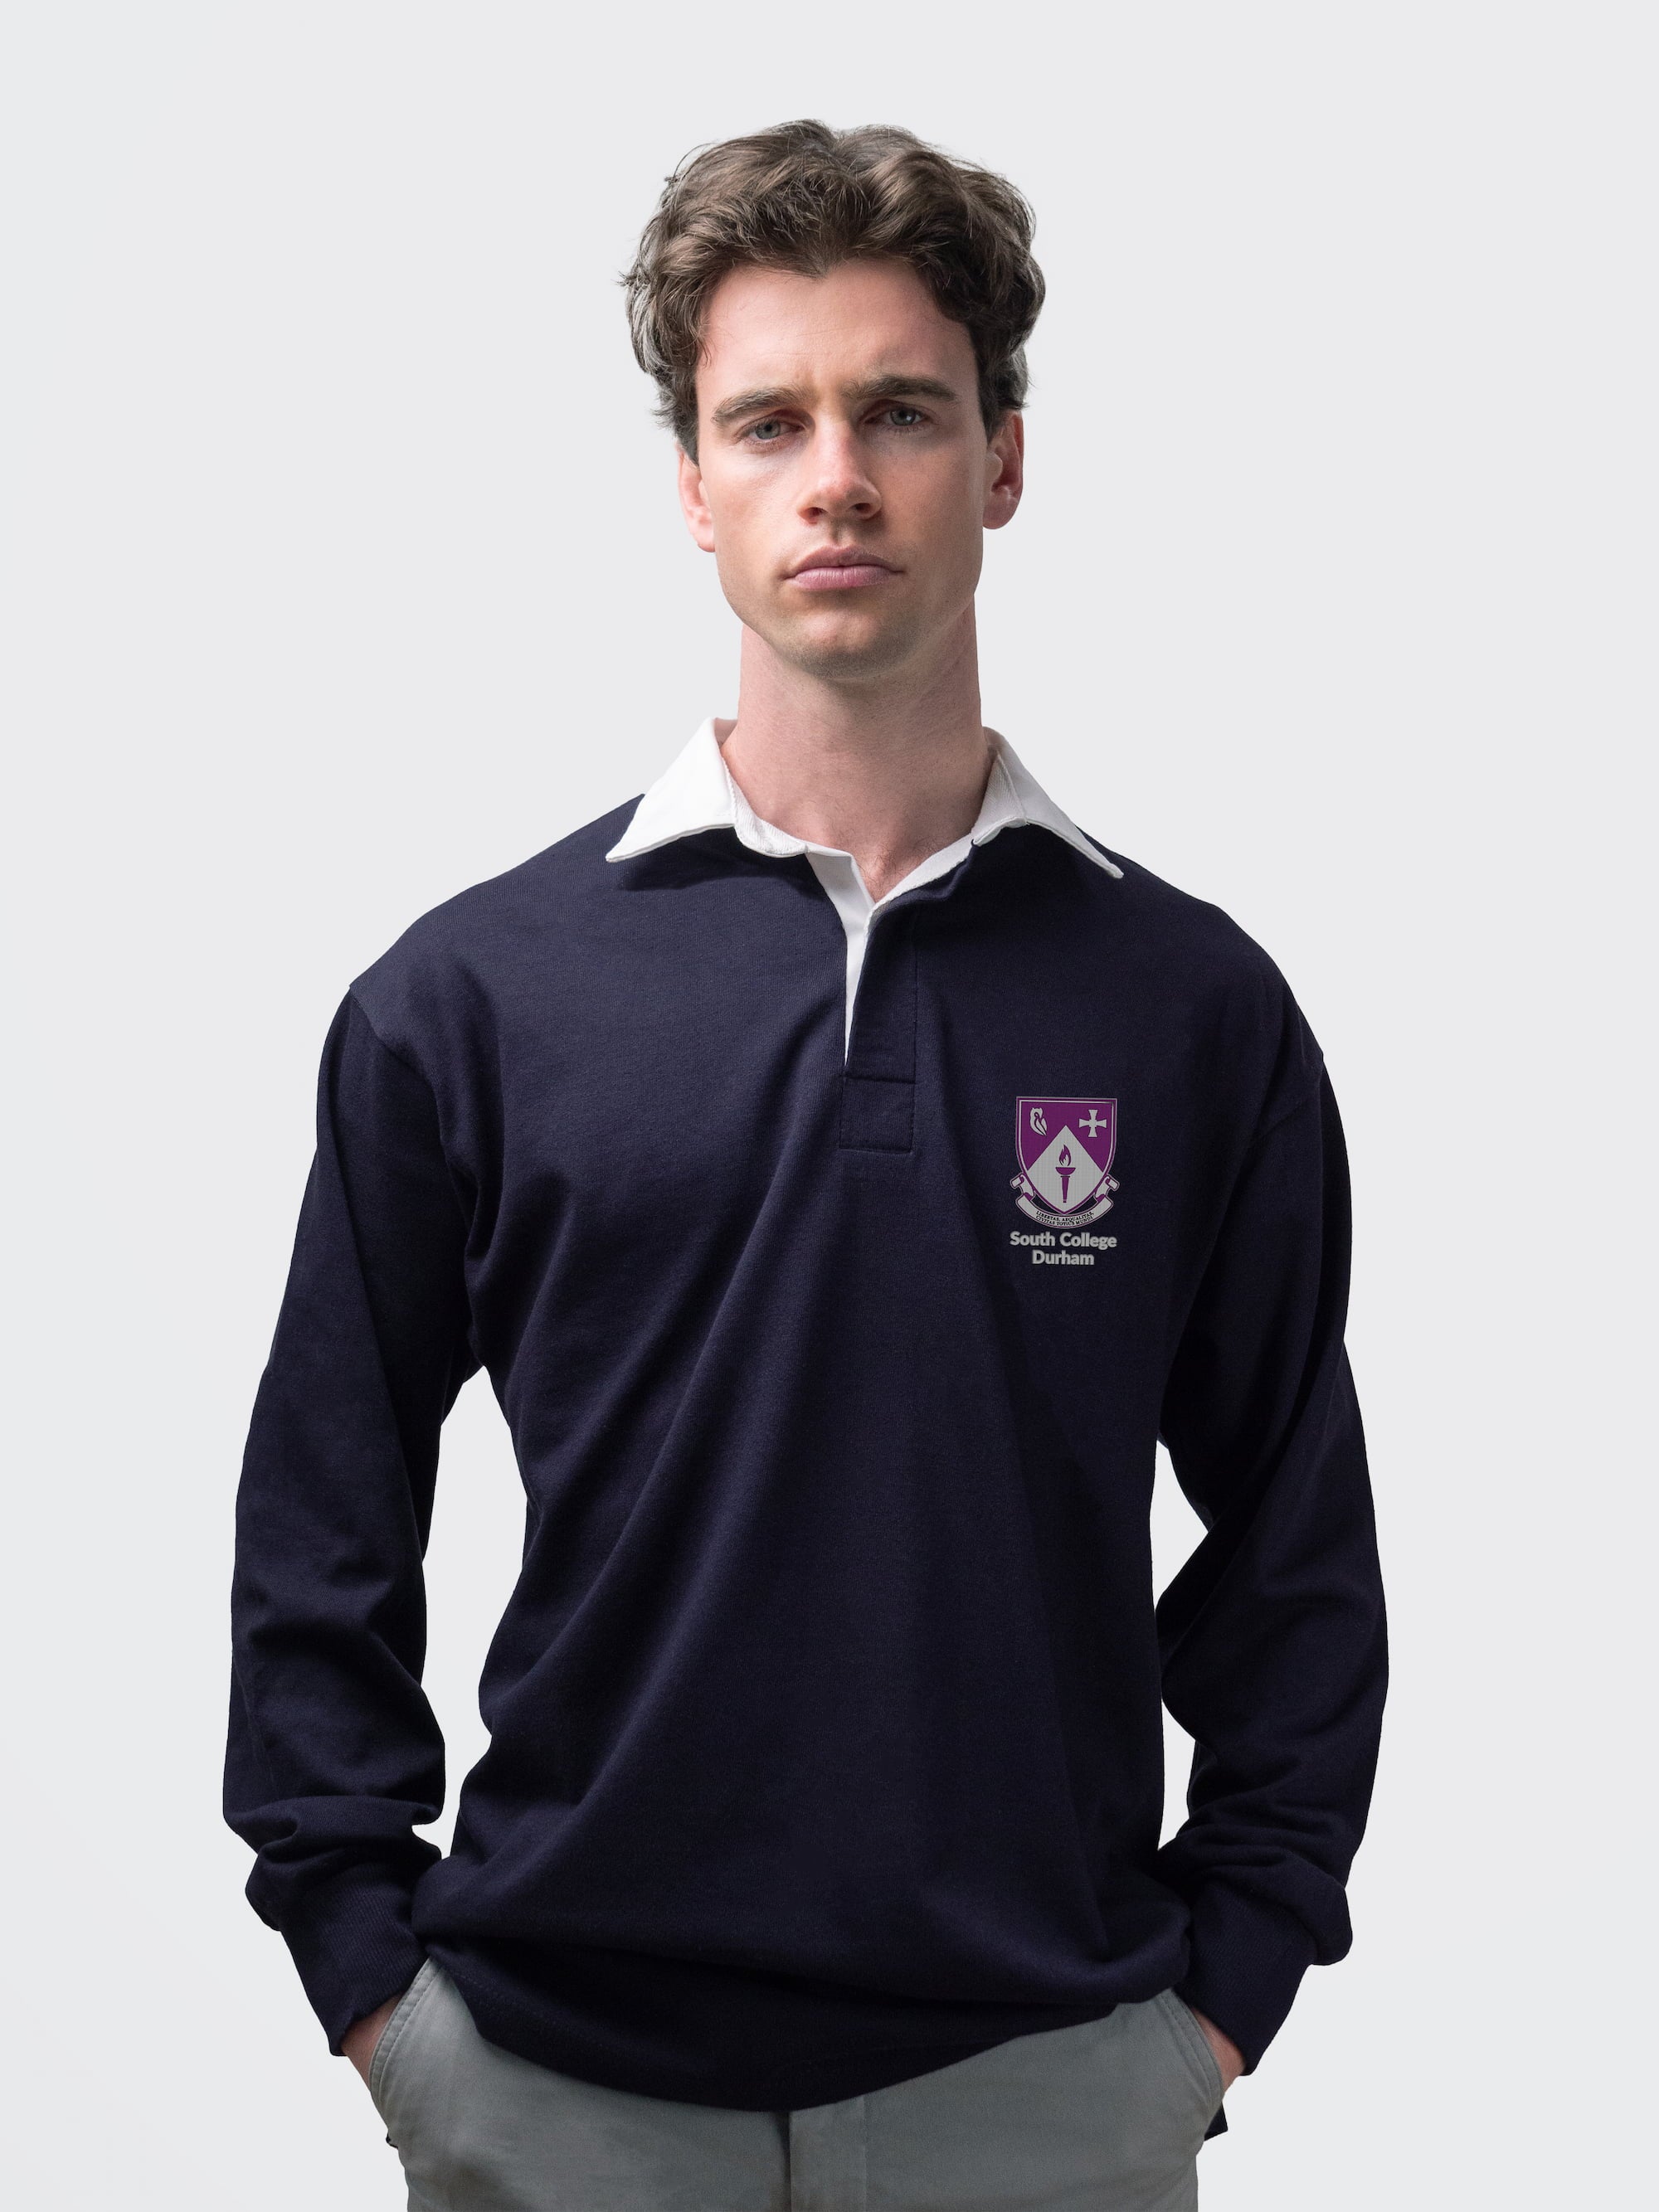 South student wearing an embroidered mens rugby shirt in navy